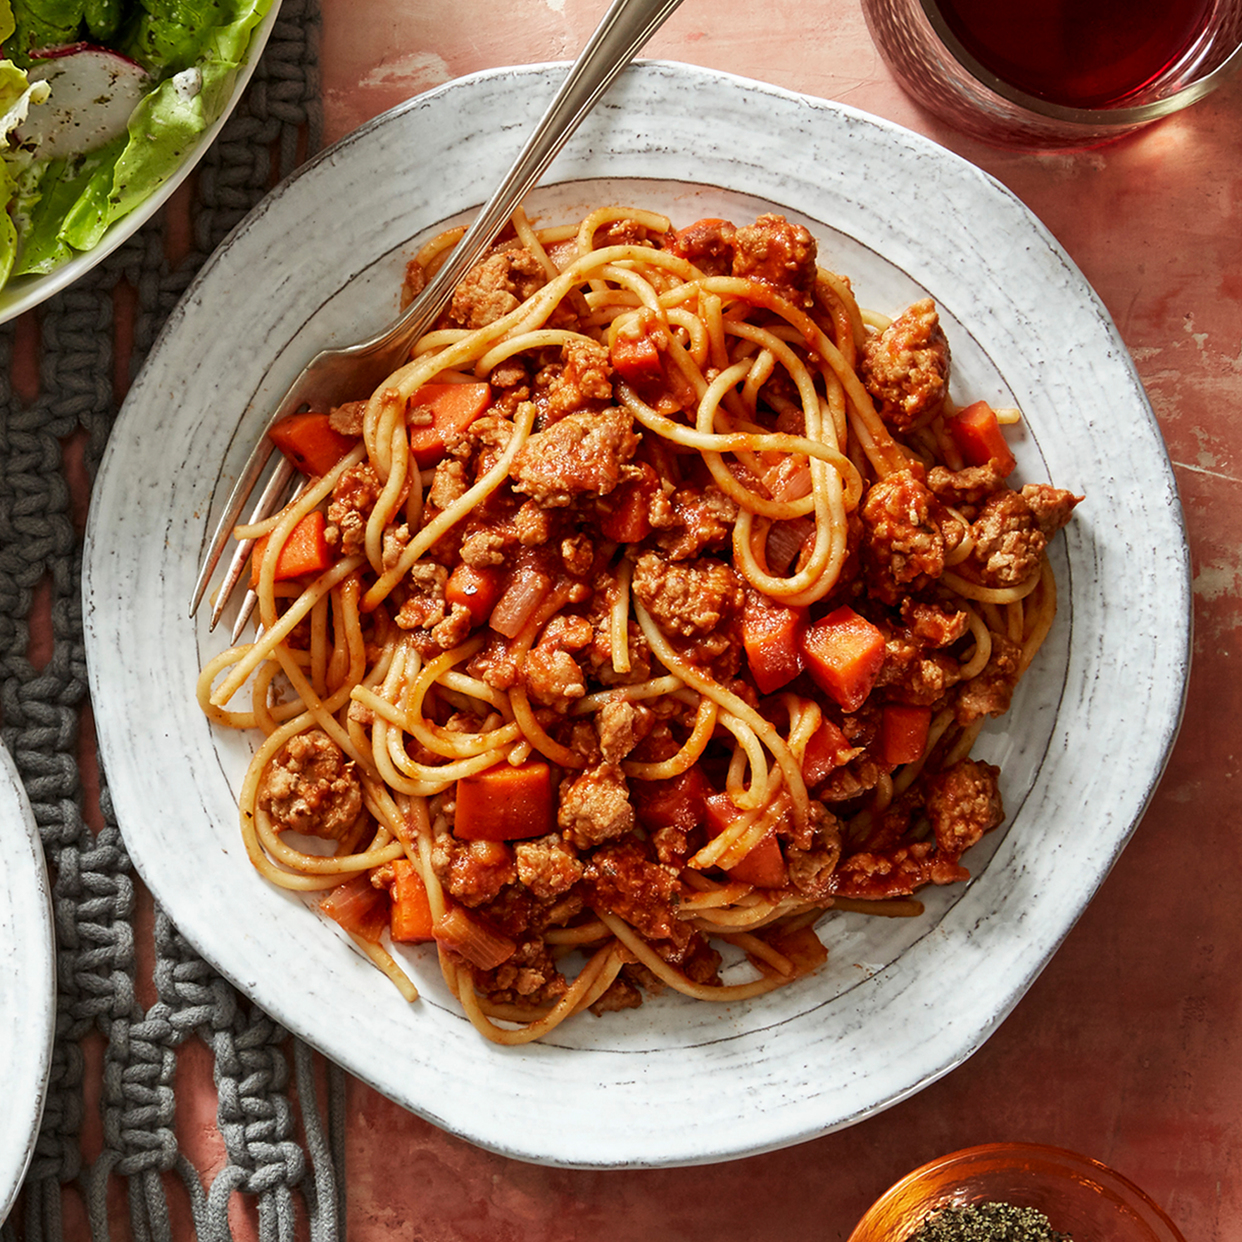 Food Quiz! Can We Guess Your Age From Your Food Choices? Spaghetti bolognese